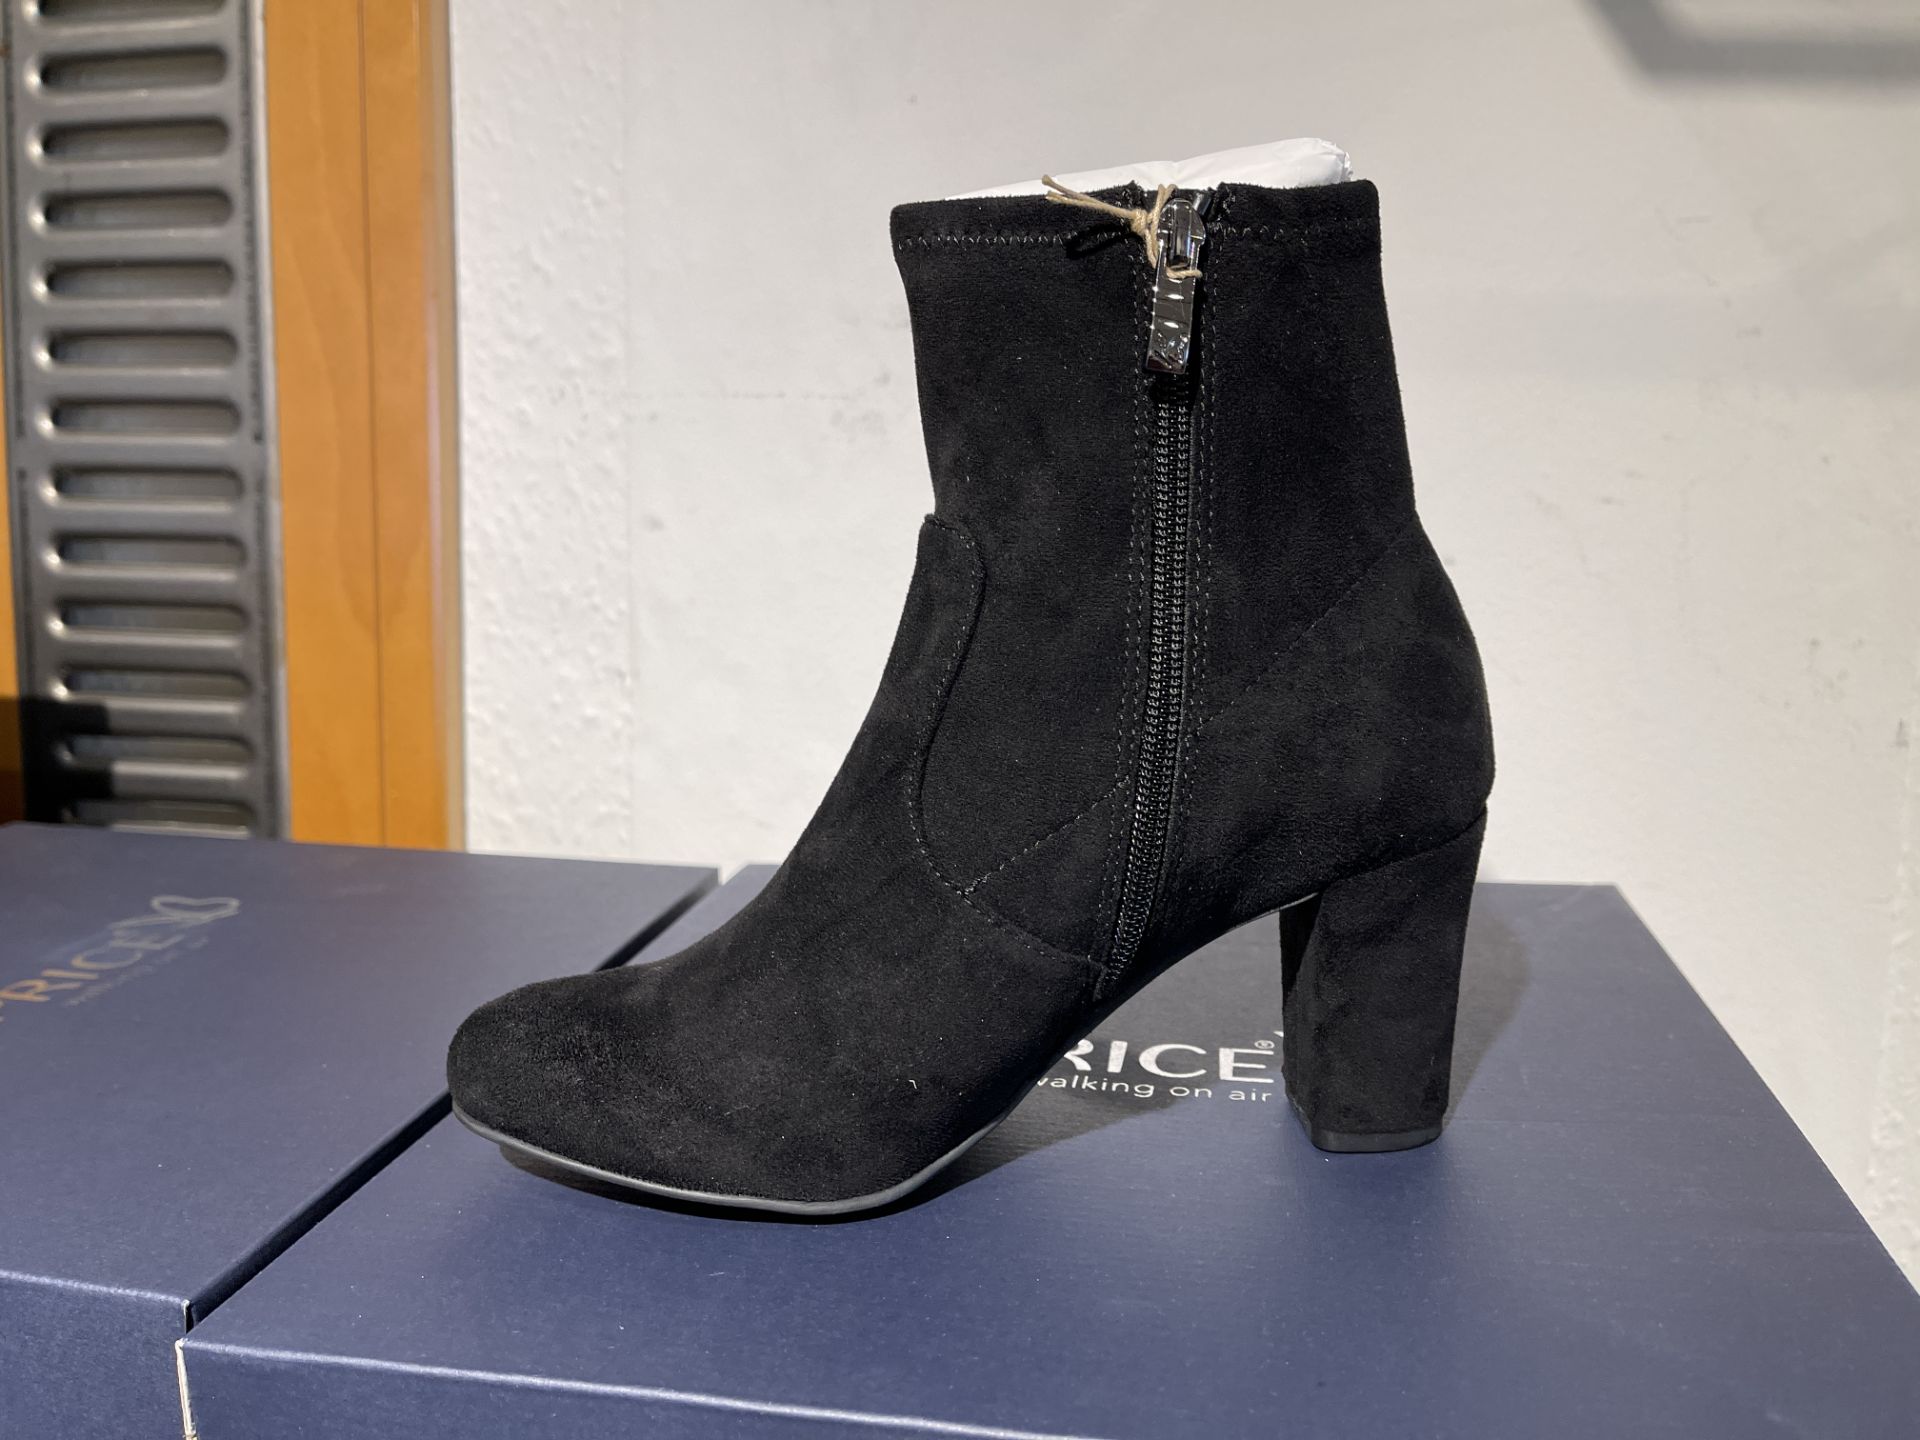 Caprice 13 Pairs: Black Stretch Ankle Boots 9-25300-25 044. Sizes 3 - 6.5 (RRP £59) - Image 2 of 8